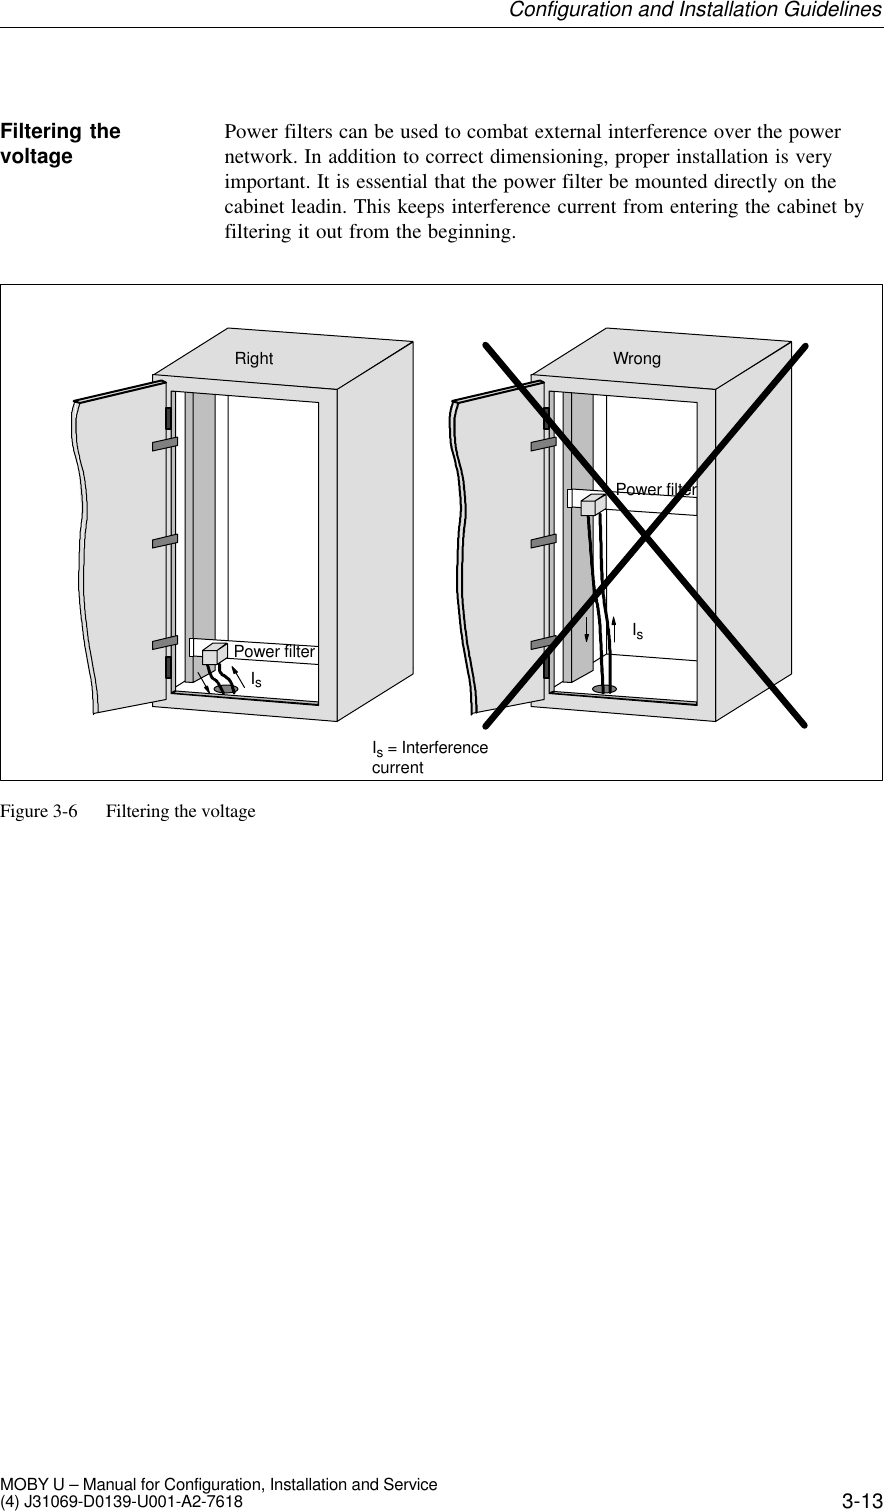 3-13MOBY U – Manual for Configuration, Installation and Service(4) J31069-D0139-U001-A2-7618Power filters can be used to combat external interference over the powernetwork. In addition to correct dimensioning, proper installation is veryimportant. It is essential that the power filter be mounted directly on thecabinet leadin. This keeps interference current from entering the cabinet byfiltering it out from the beginning.Power filterIsRightPower filterWrongIs = InterferencecurrentIsFigure 3-6 Filtering the voltageFiltering thevoltageConfiguration and Installation Guidelines